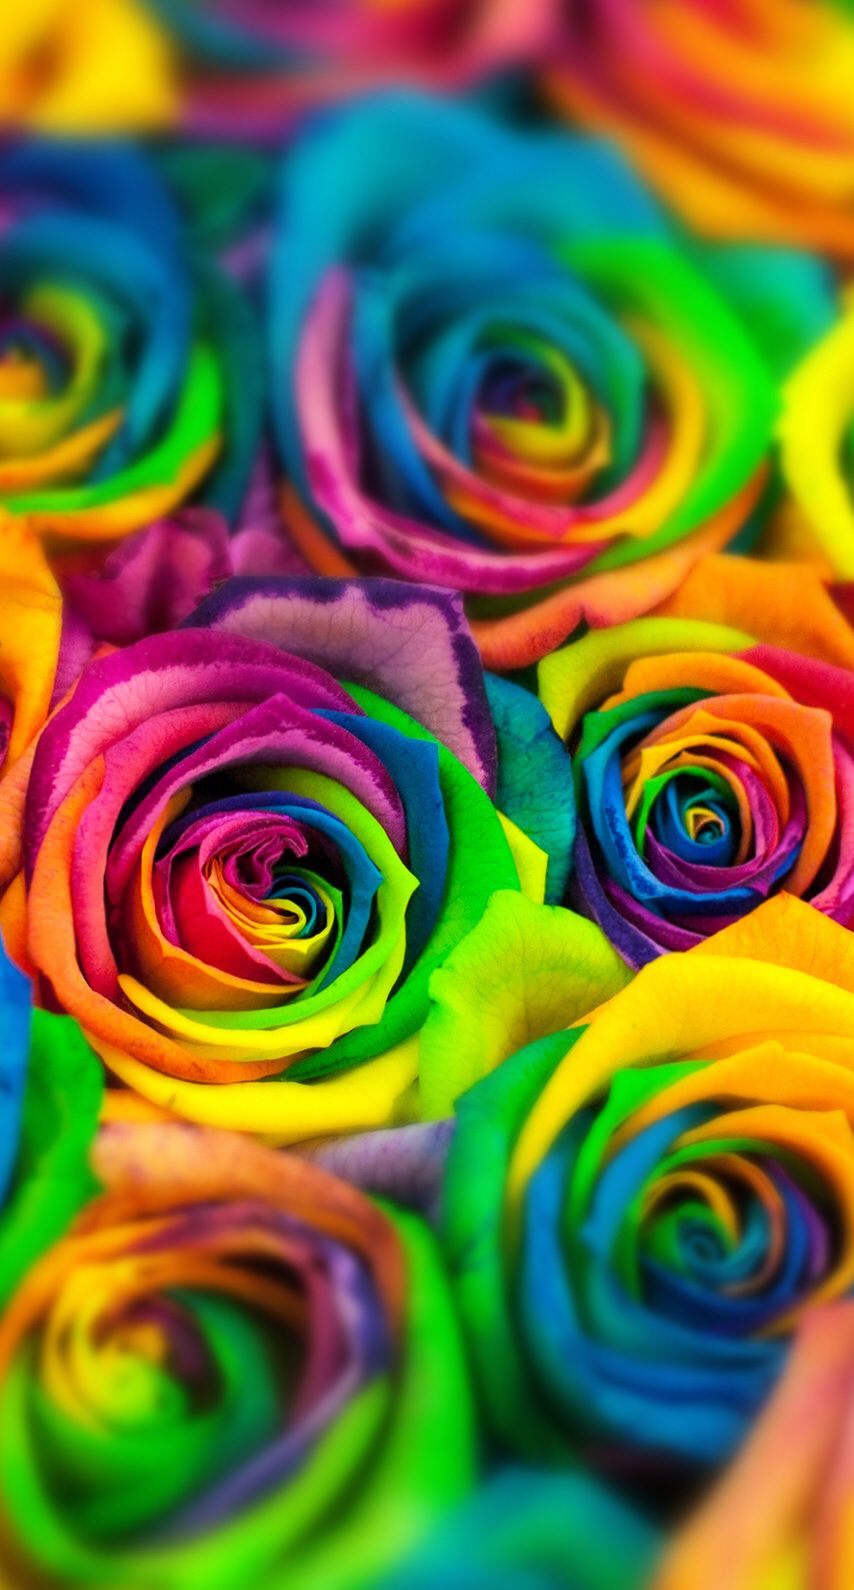 Hey, Check Out This Awesome Wallpaper - Rainbow Rose , HD Wallpaper & Backgrounds